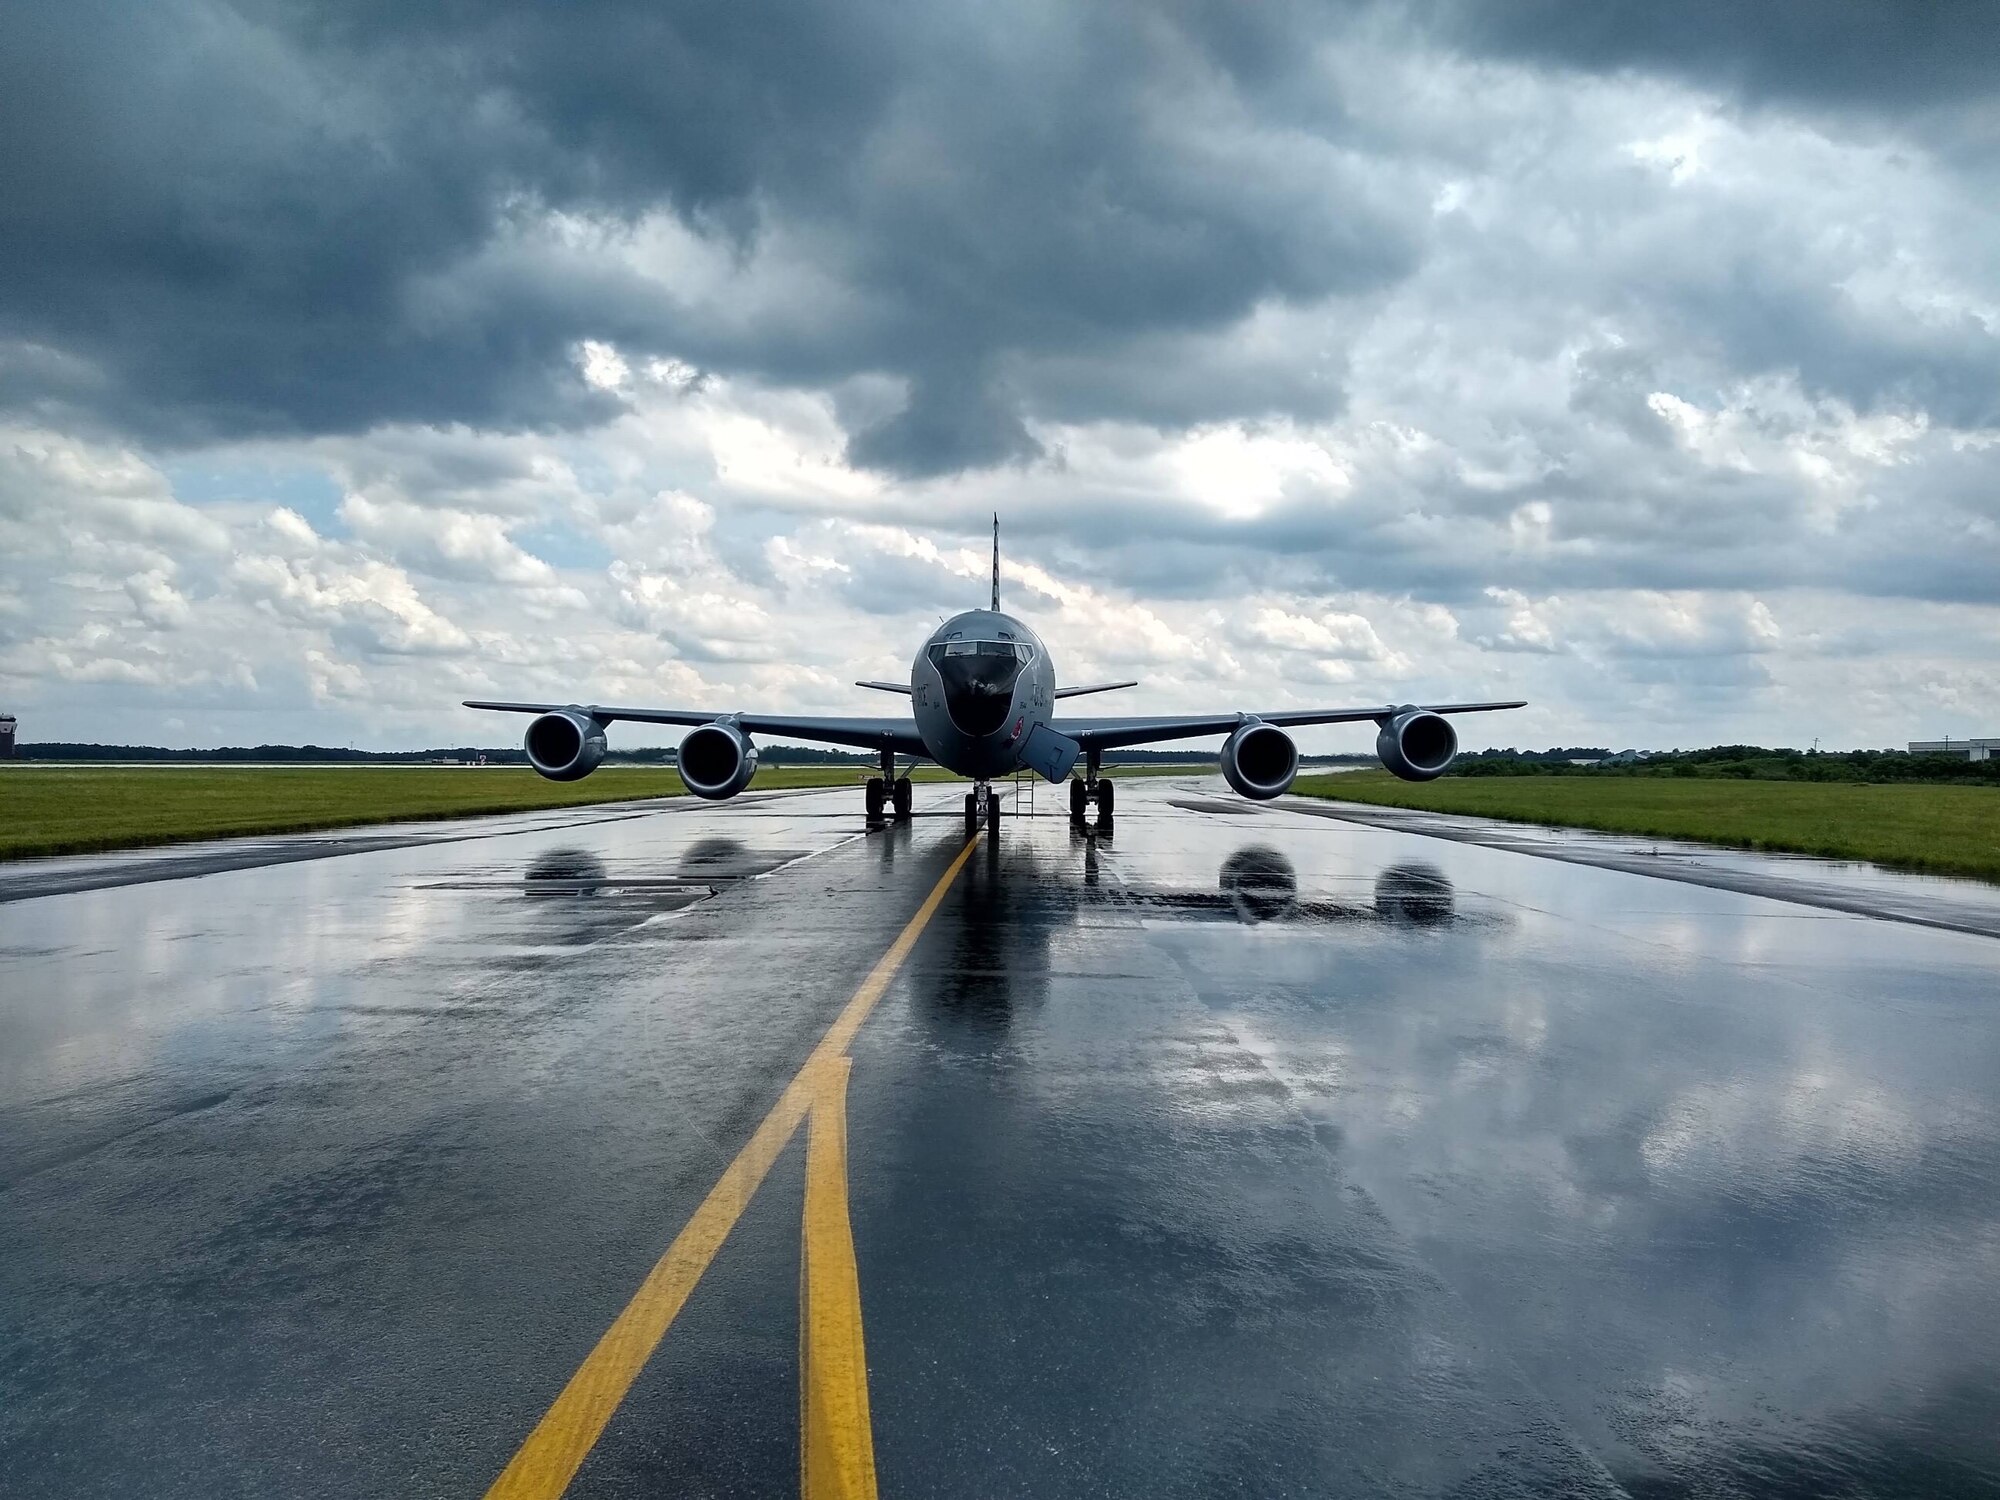 A 108th Wing KC-135R Stratotanker sits on the taxiway at Joint Base McGuire-Dix-Lakehurst, N.J. during a rainstorm during a recent engine running crew change exercise. (U.S. Air National Guard photo by Lt. Col Richard Friendlich)